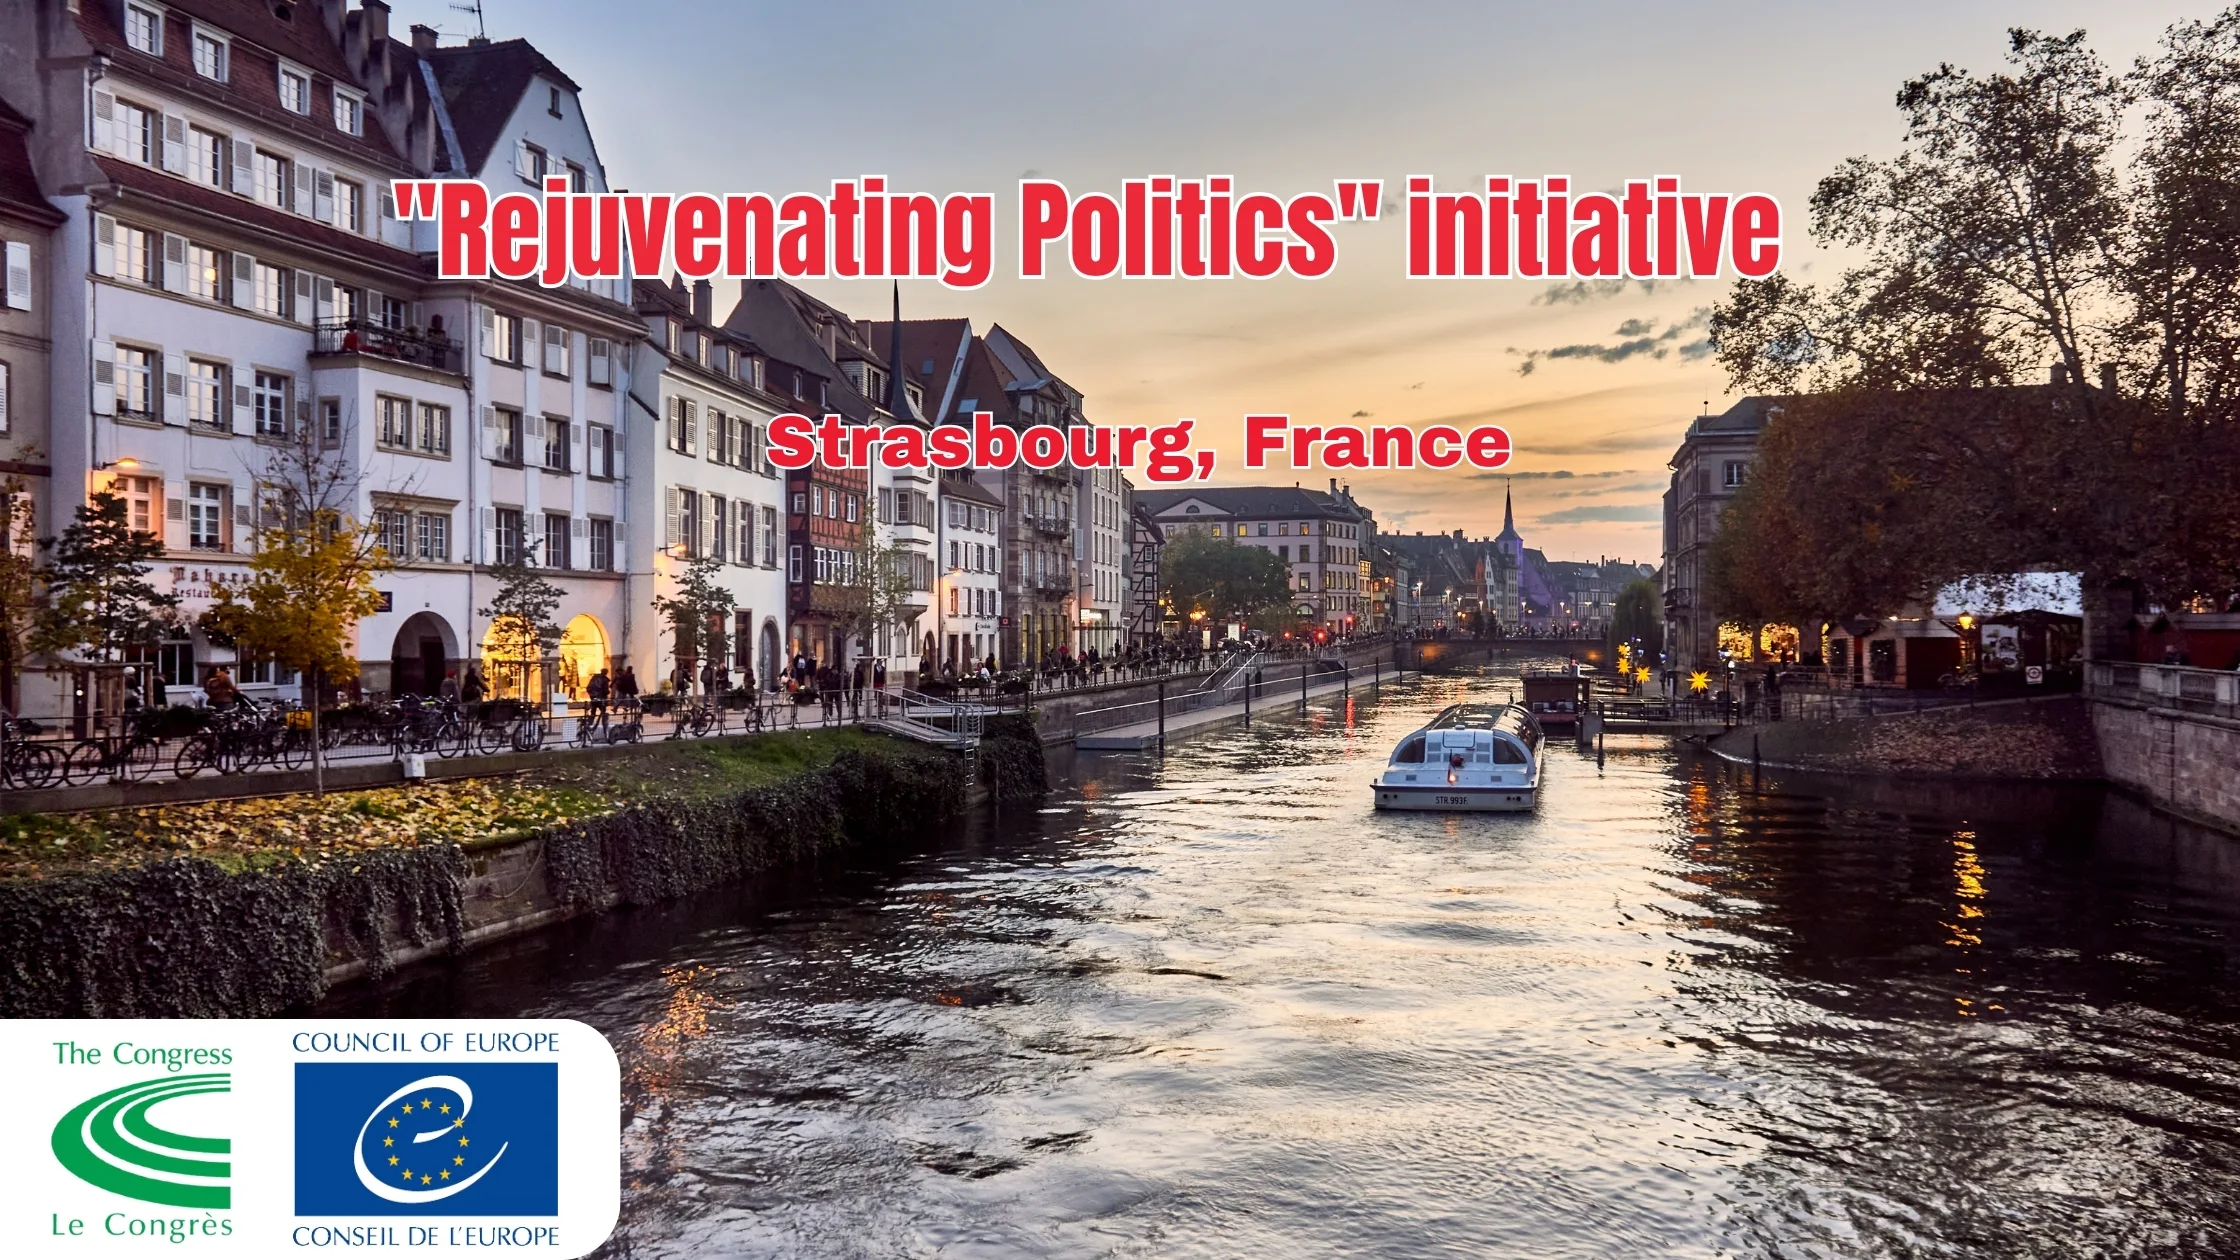 Open call for youth to join “Rejuvenating politics” initiative in France (Fully Funded)